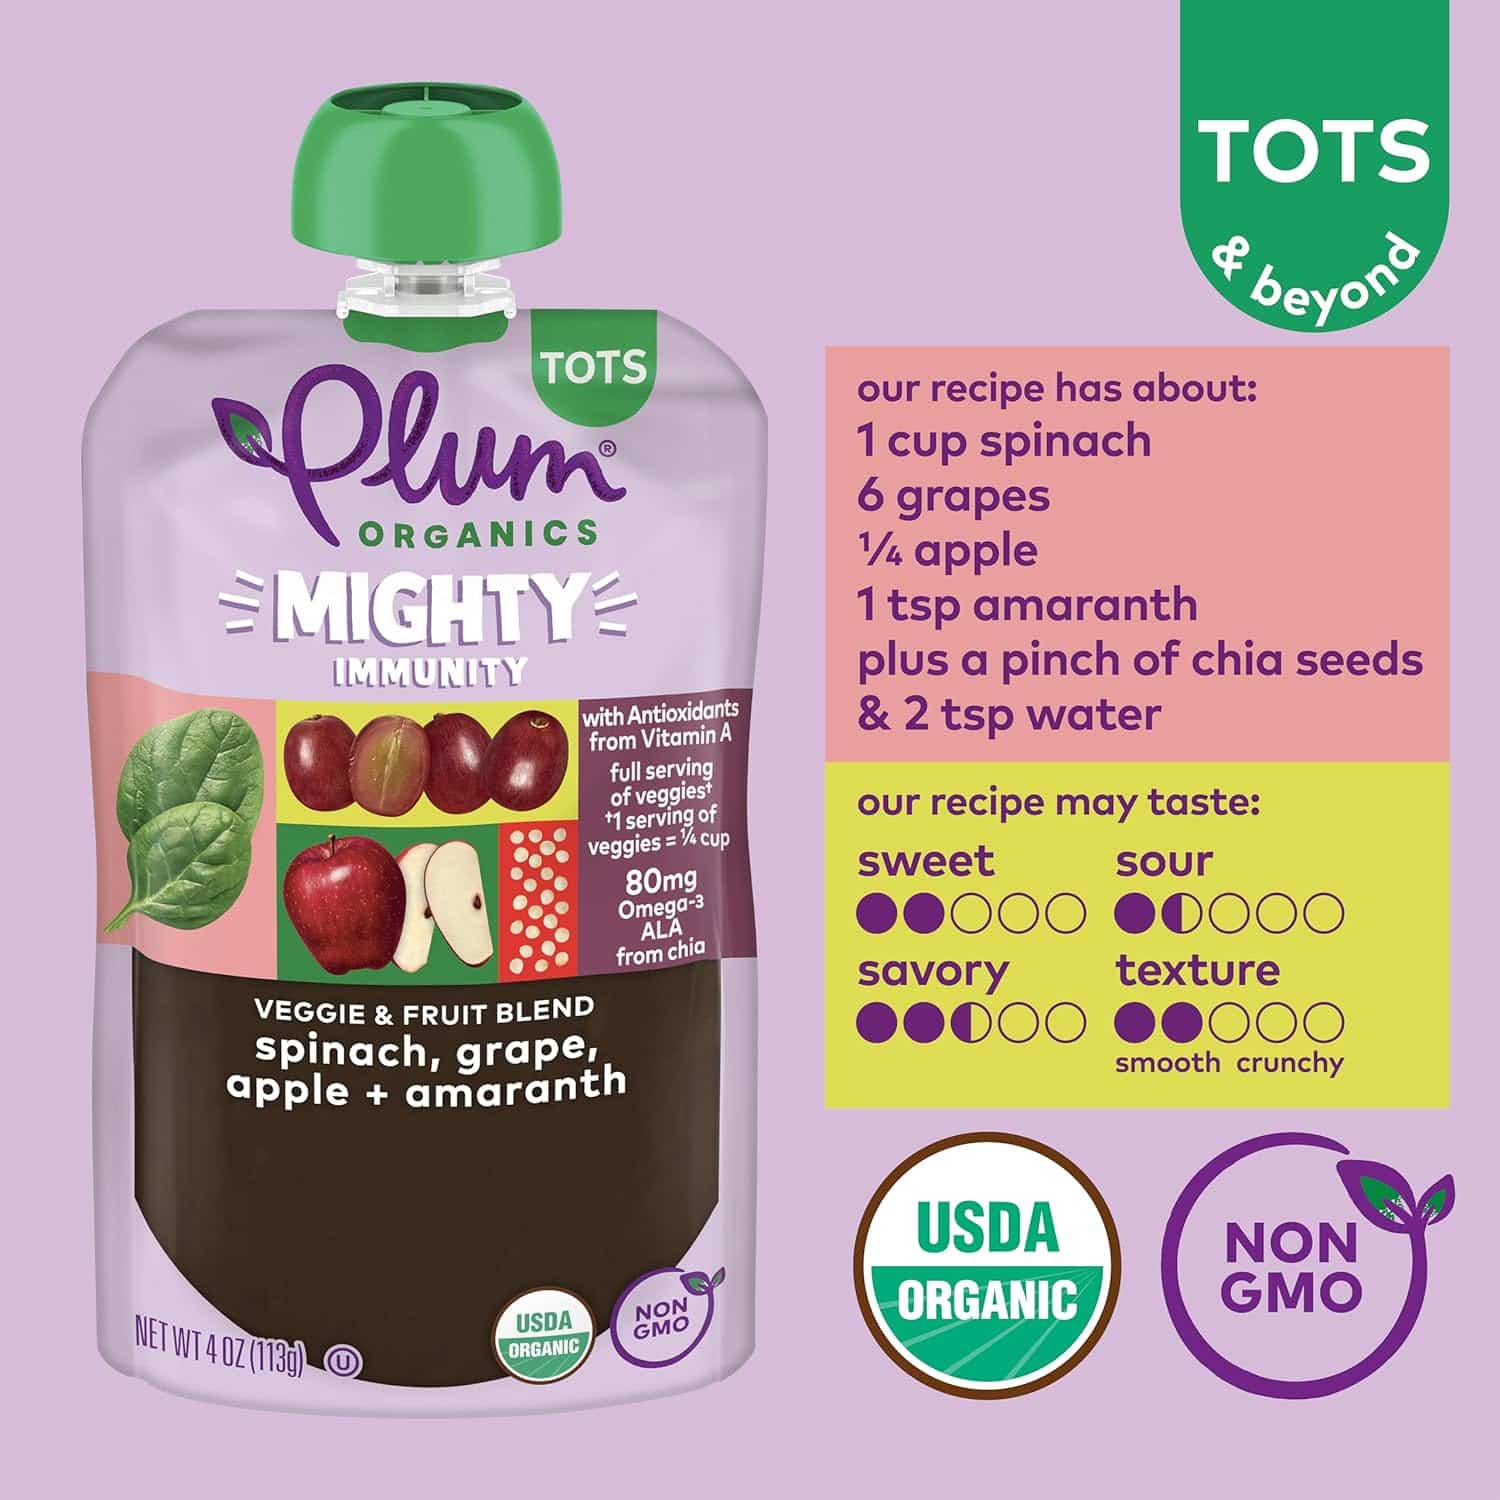 Plum Organics Mighty Veggie Blends Organic Baby Food Meals: A Nutritious and Delicious Review